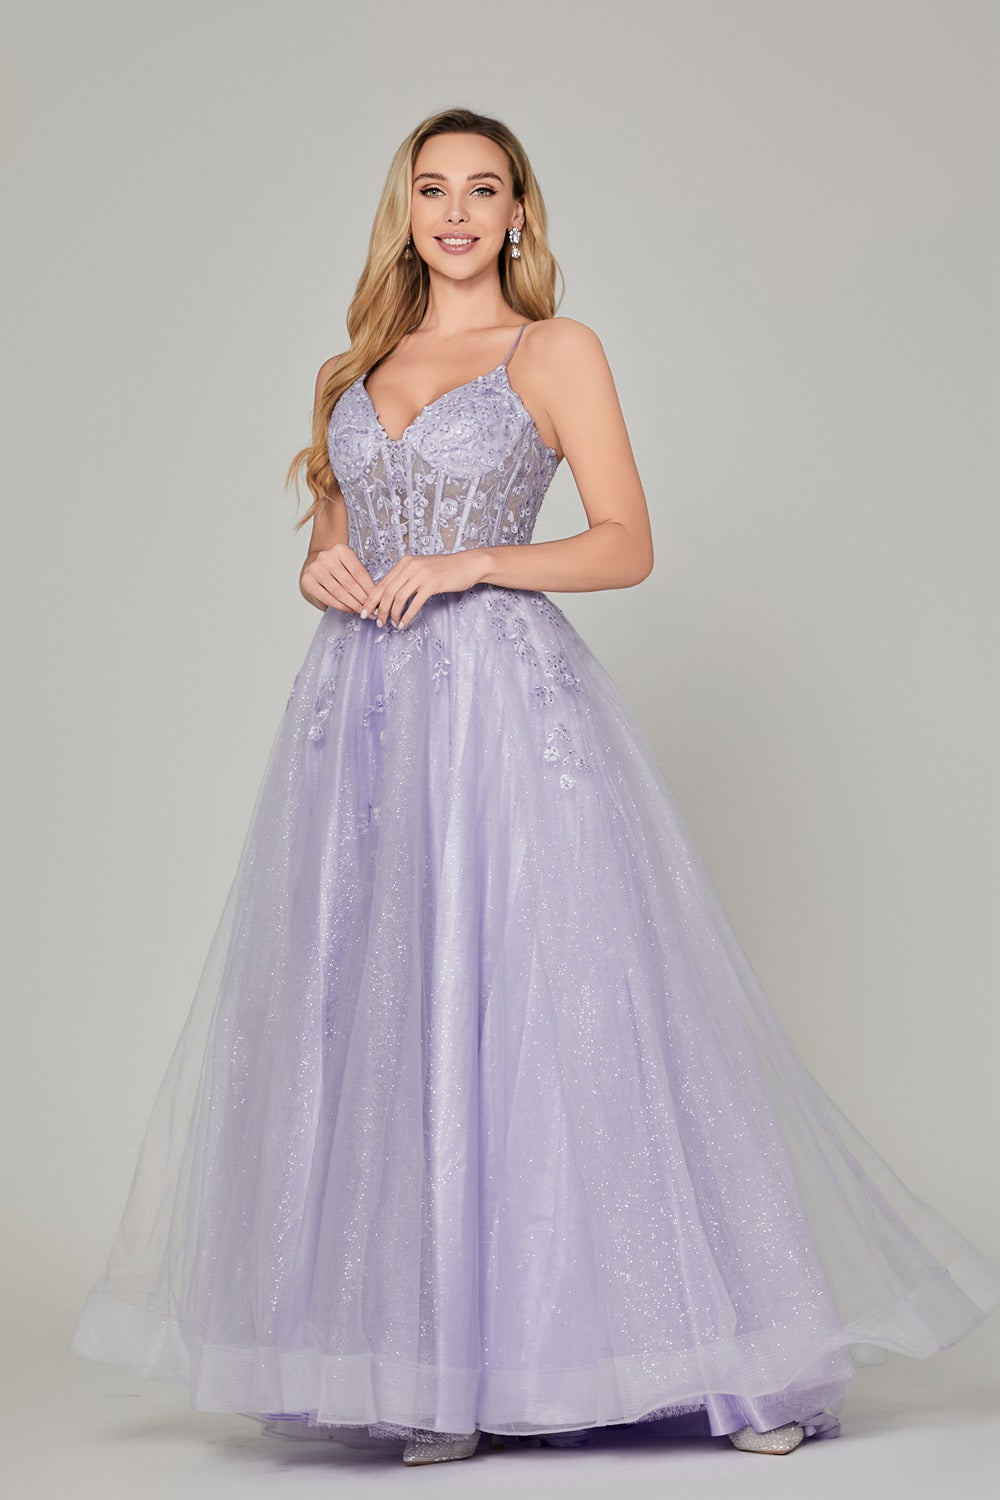 Wholesale Sparkling Fabric Lace and Tulle Prom Dresses 32814